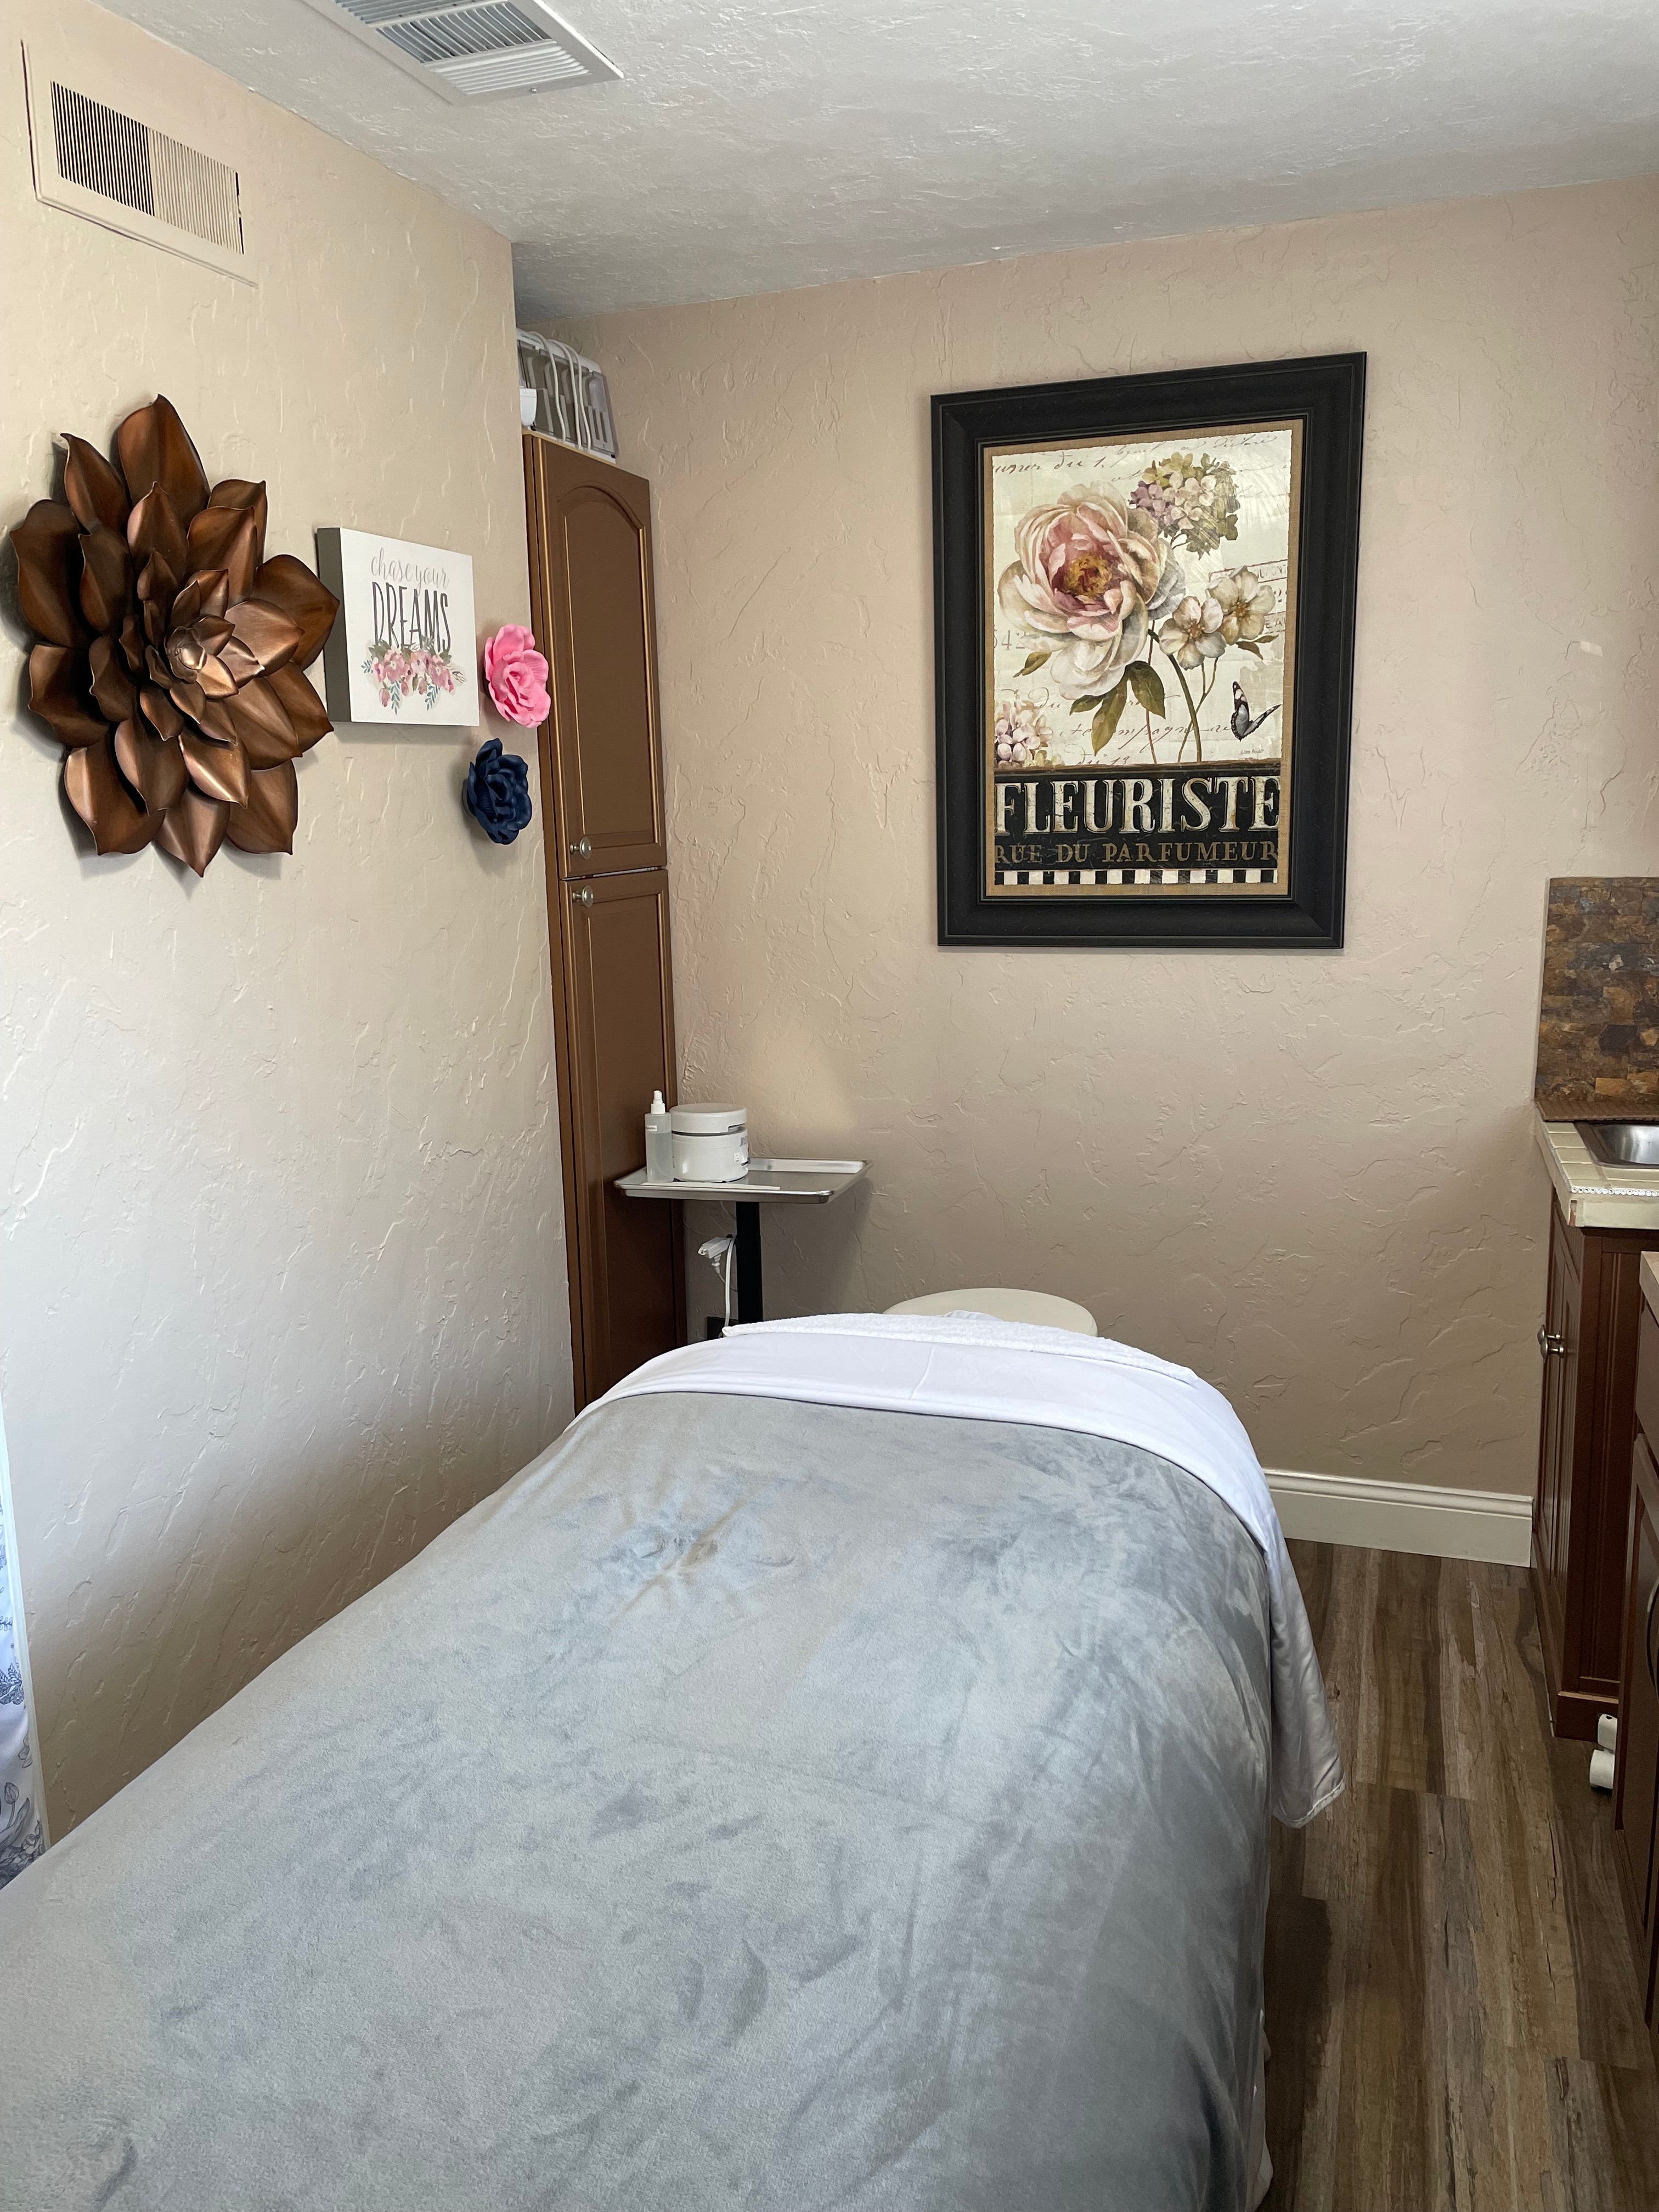 A serene treatment room with beautiful pink and copper floral pictures.  The facial bed is covered with a gray soft and plush blanket for a relaxing facial treatment.